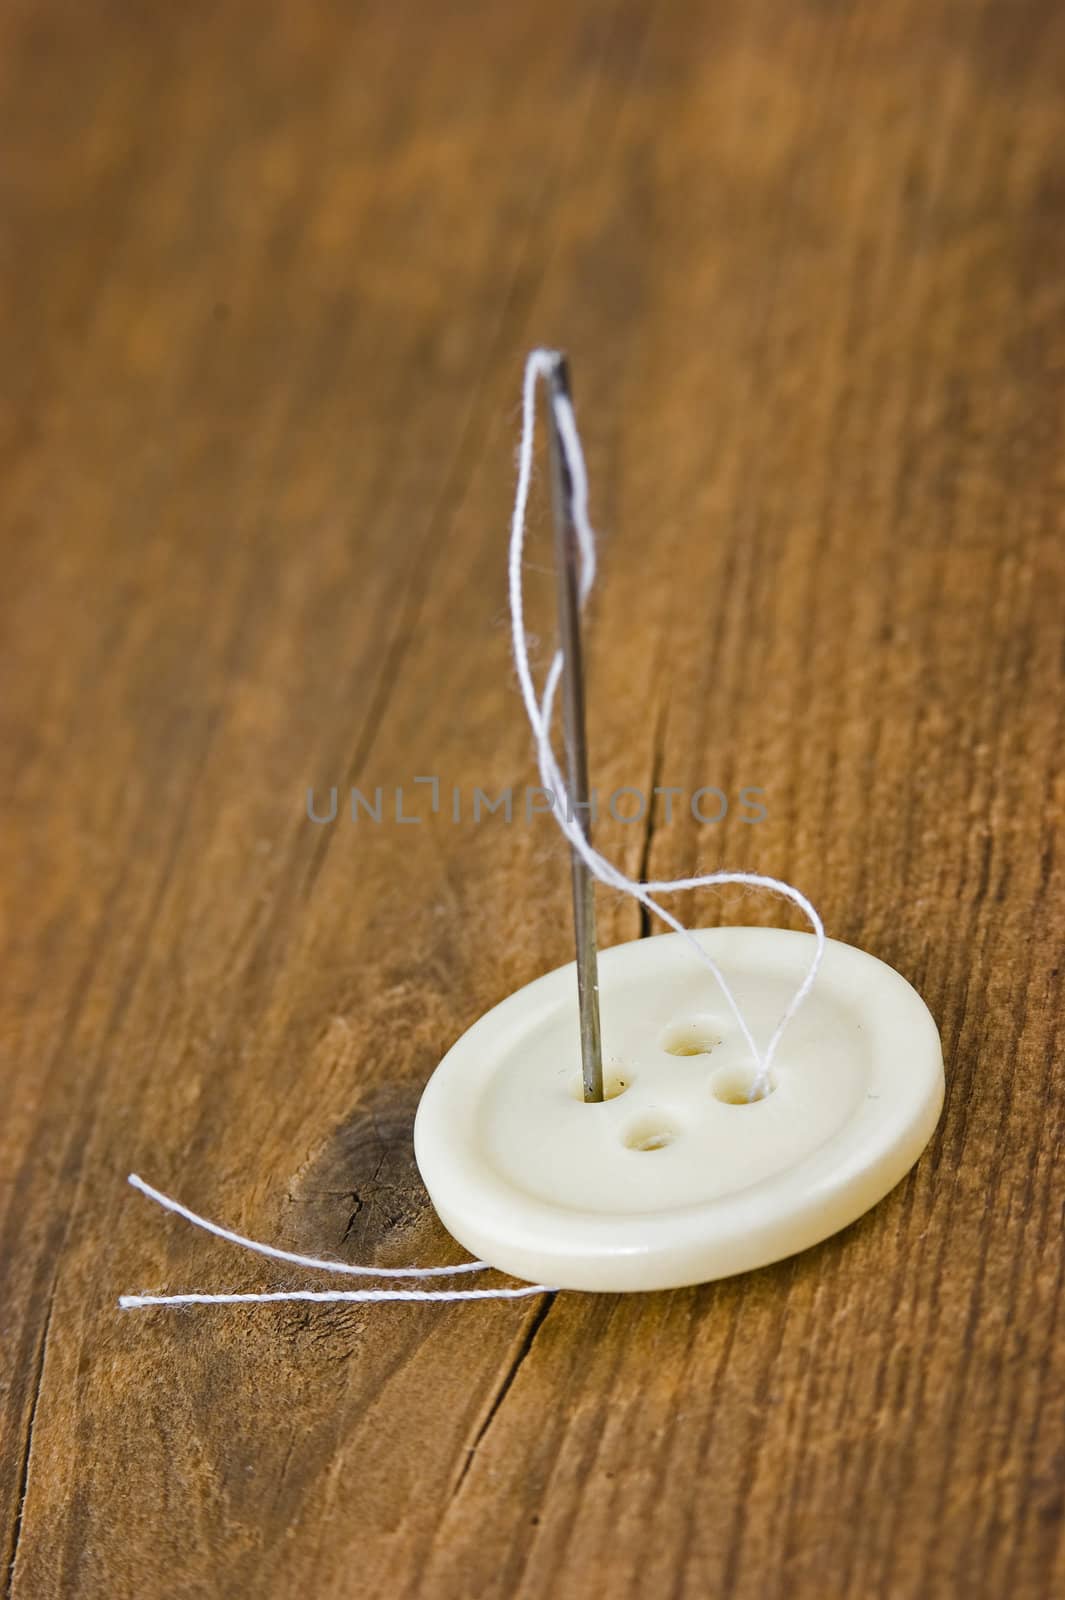 Buttons with needle and thread by oleg_zhukov